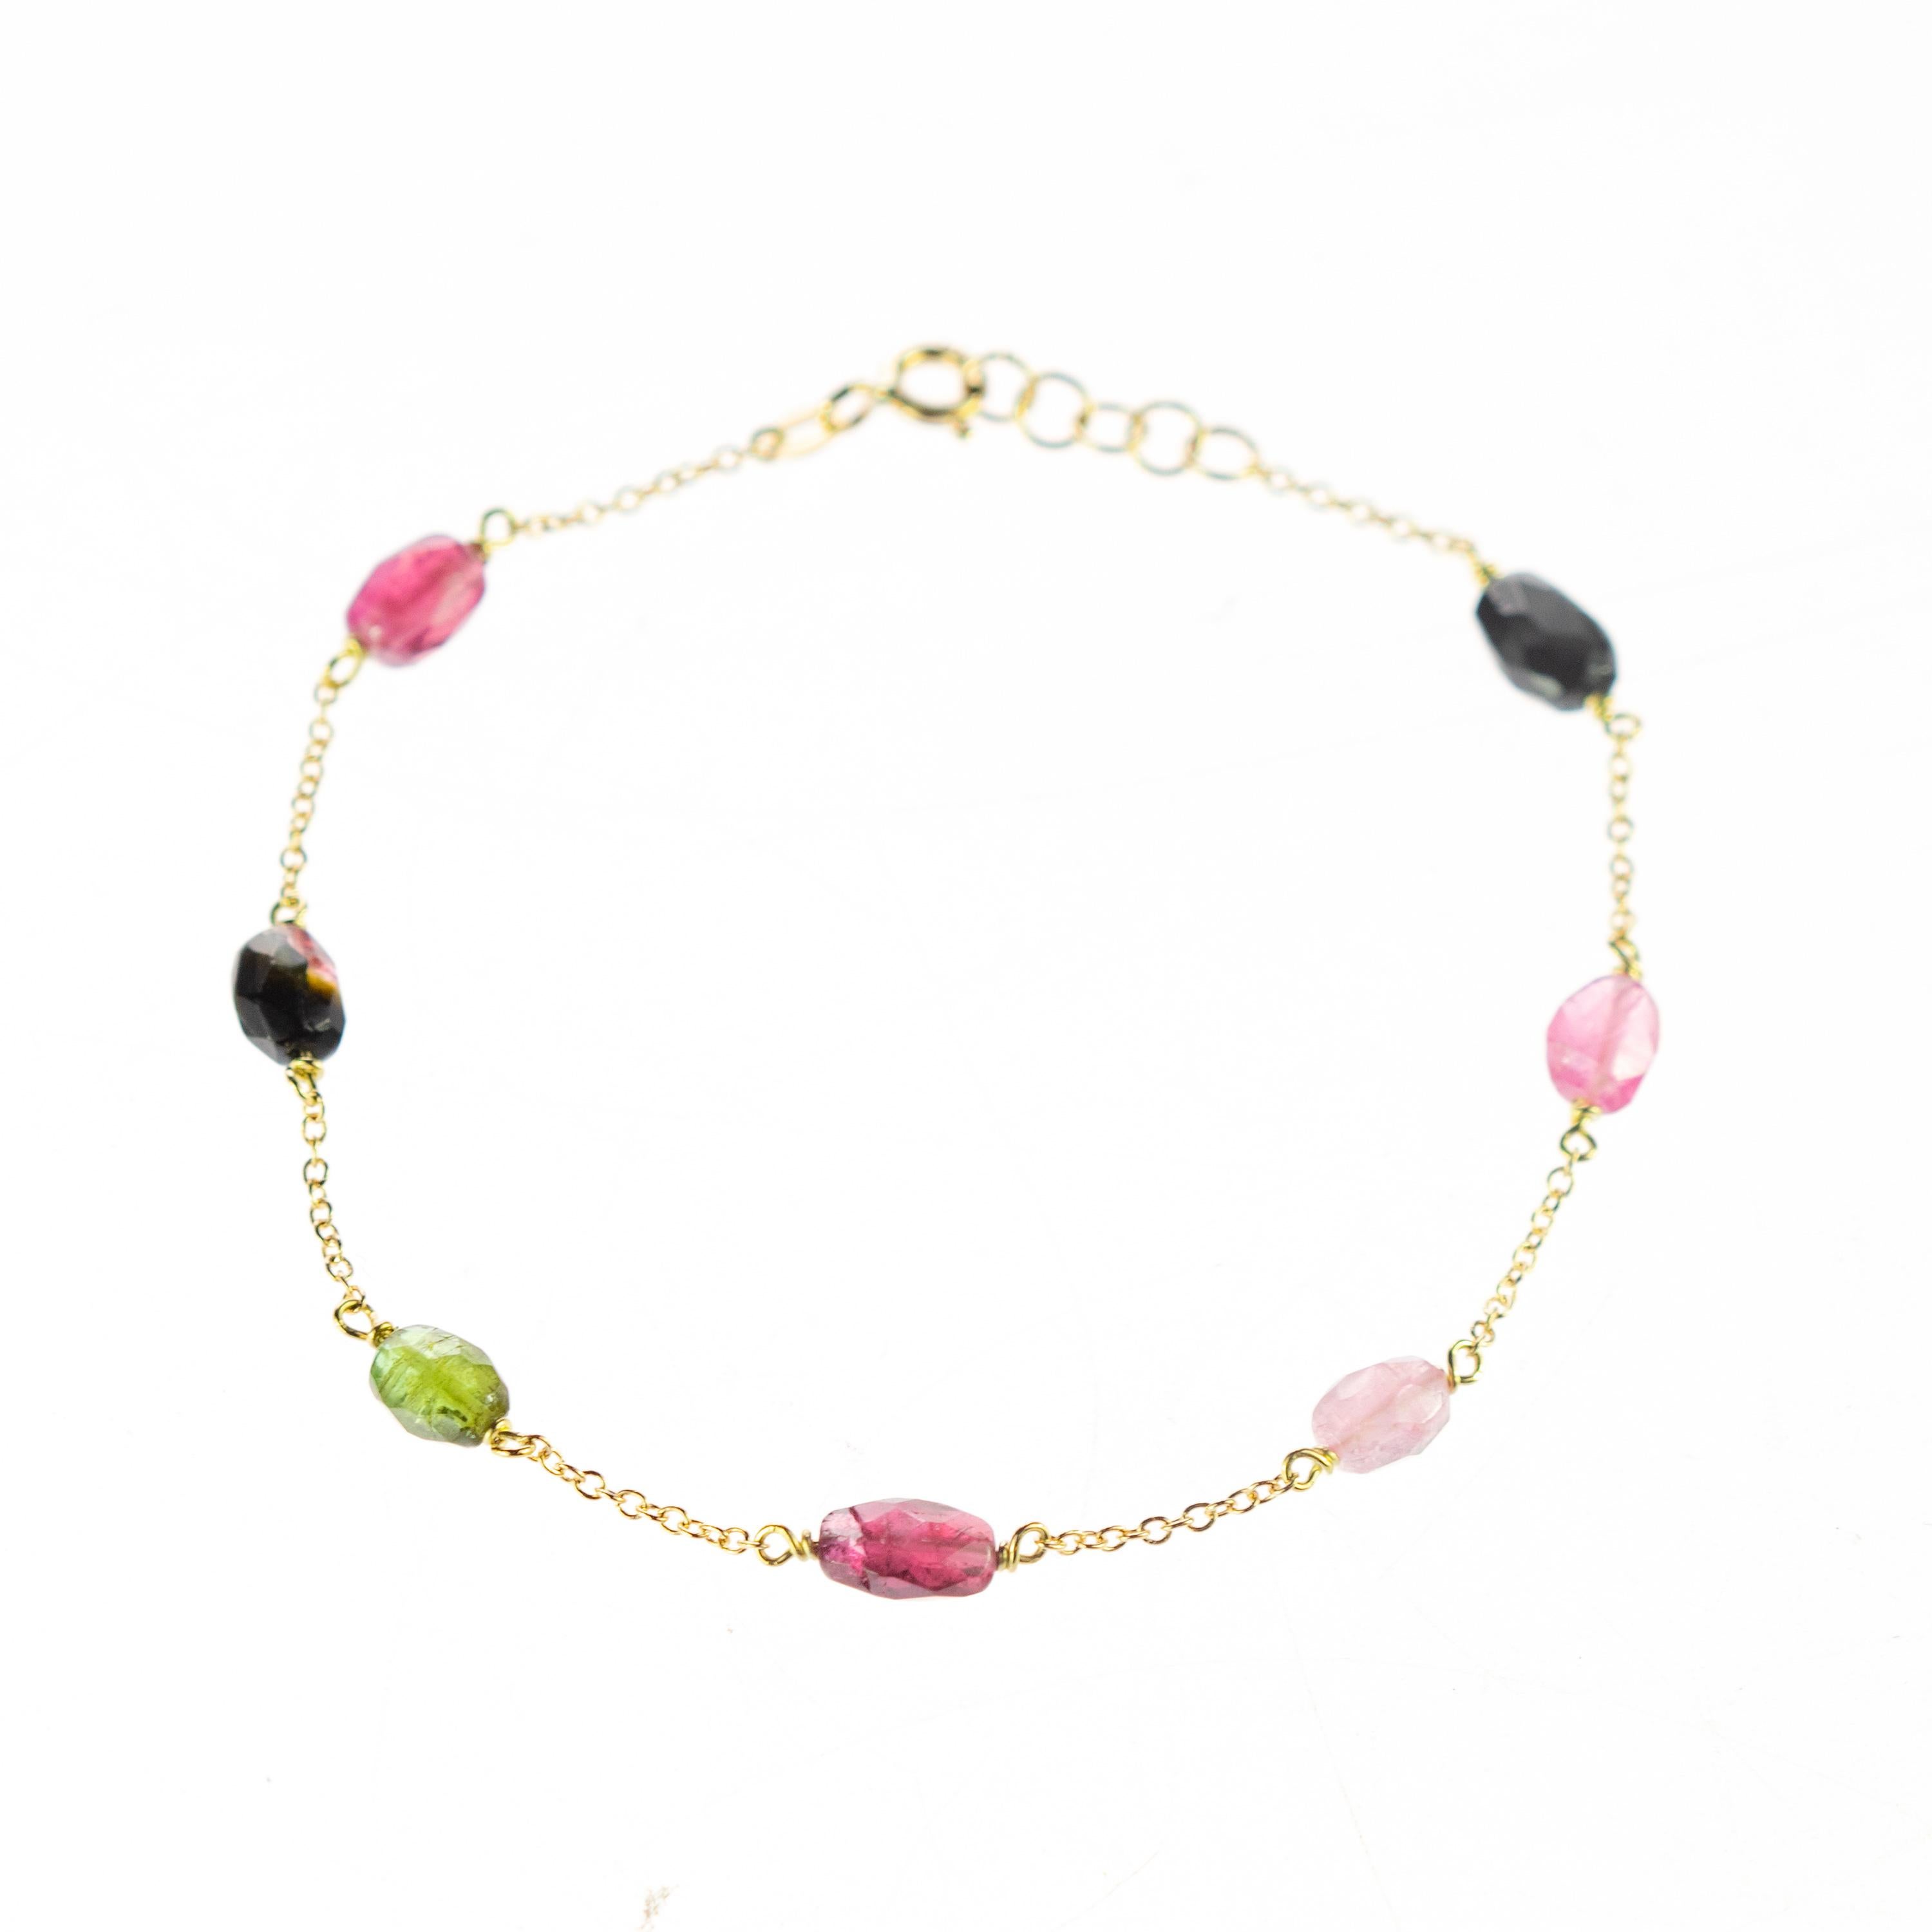 Intini Jewels signature quality on a modern and contemporary design jewel. Seven oval gems of top quality of tourmaline embellish a delicate 9 karat yellow gold chain bracelet. A jewel full of color and pasion. Anklet and Bracelet

Ancient beliefs